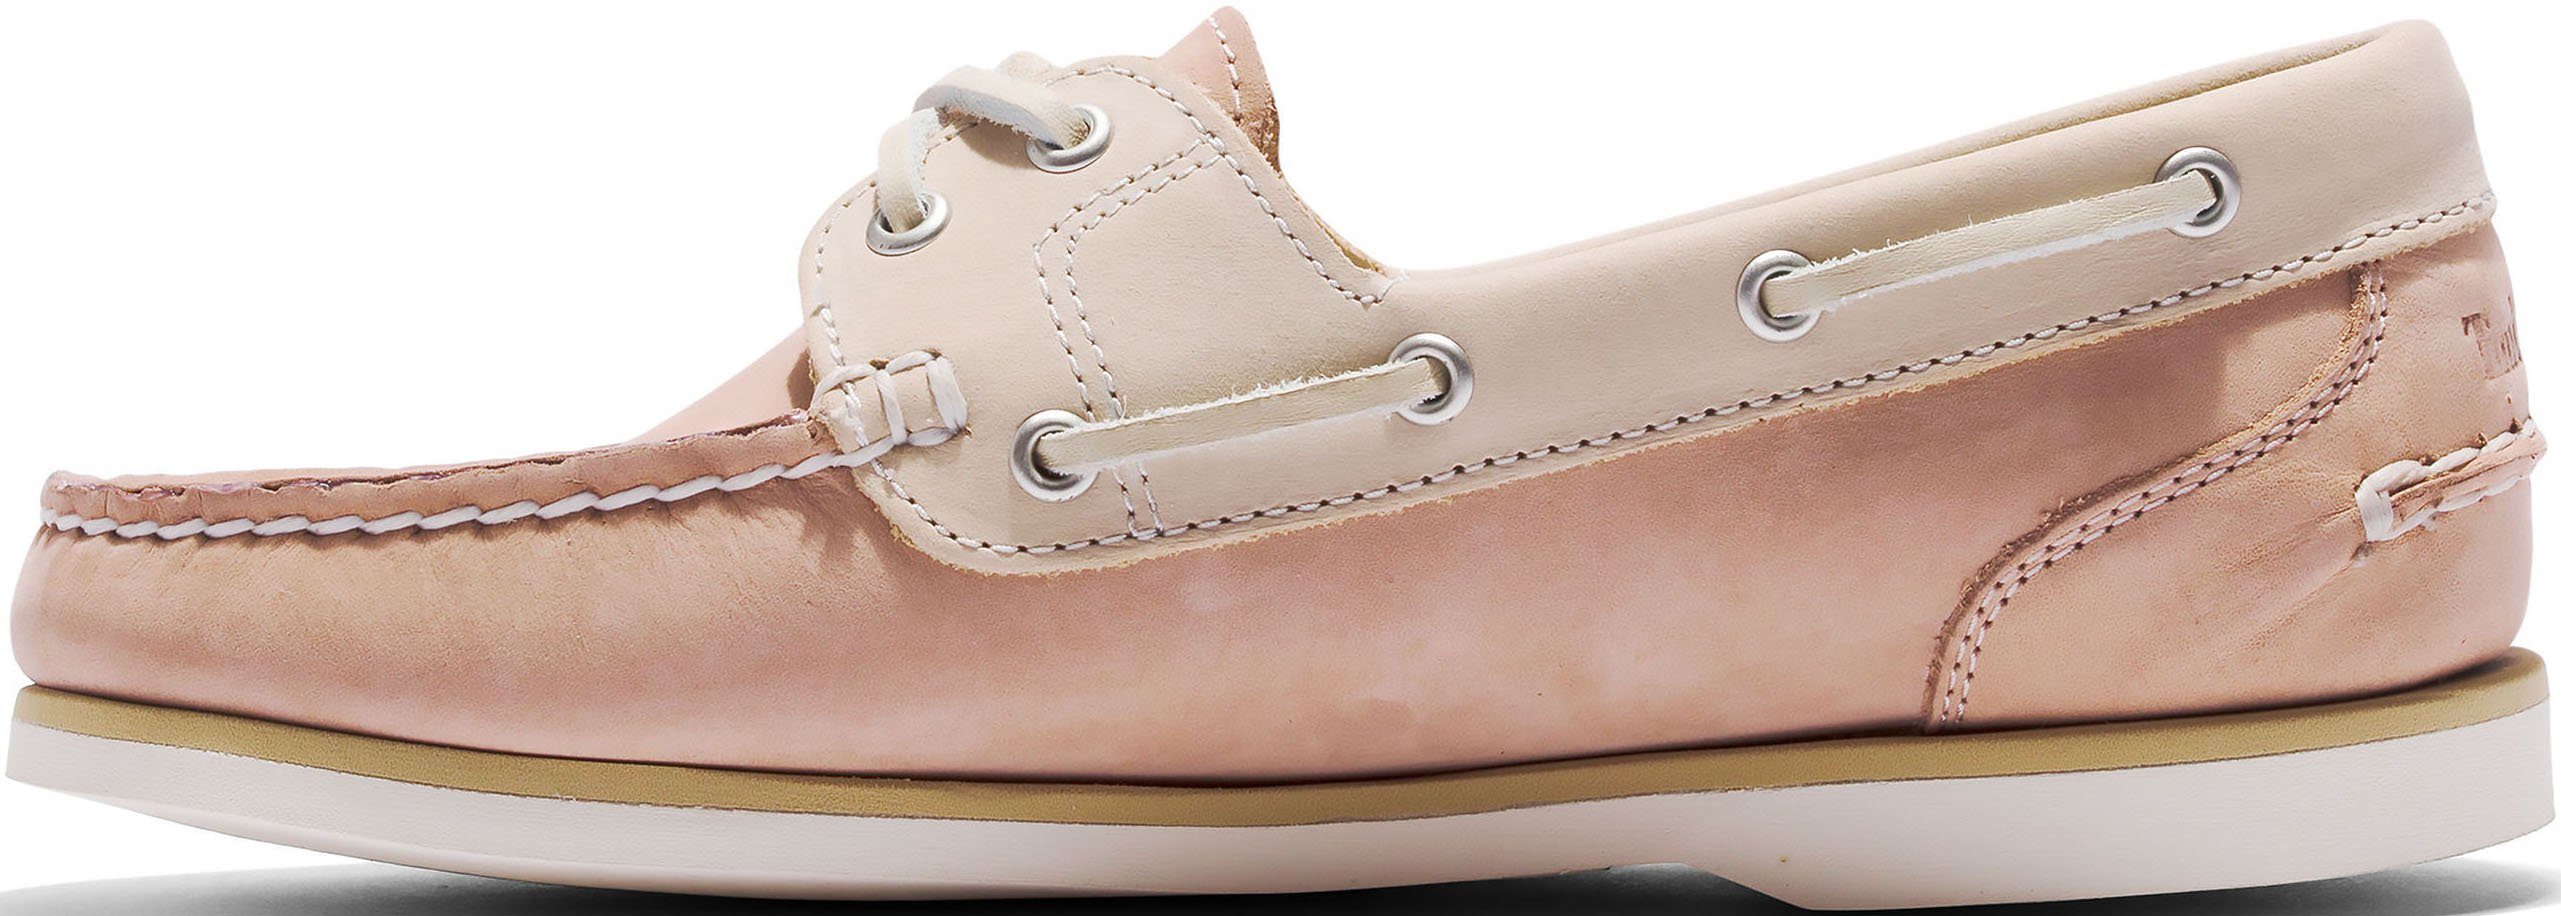 Timberland Classic Boat Eye 2 beige Bootsschuh